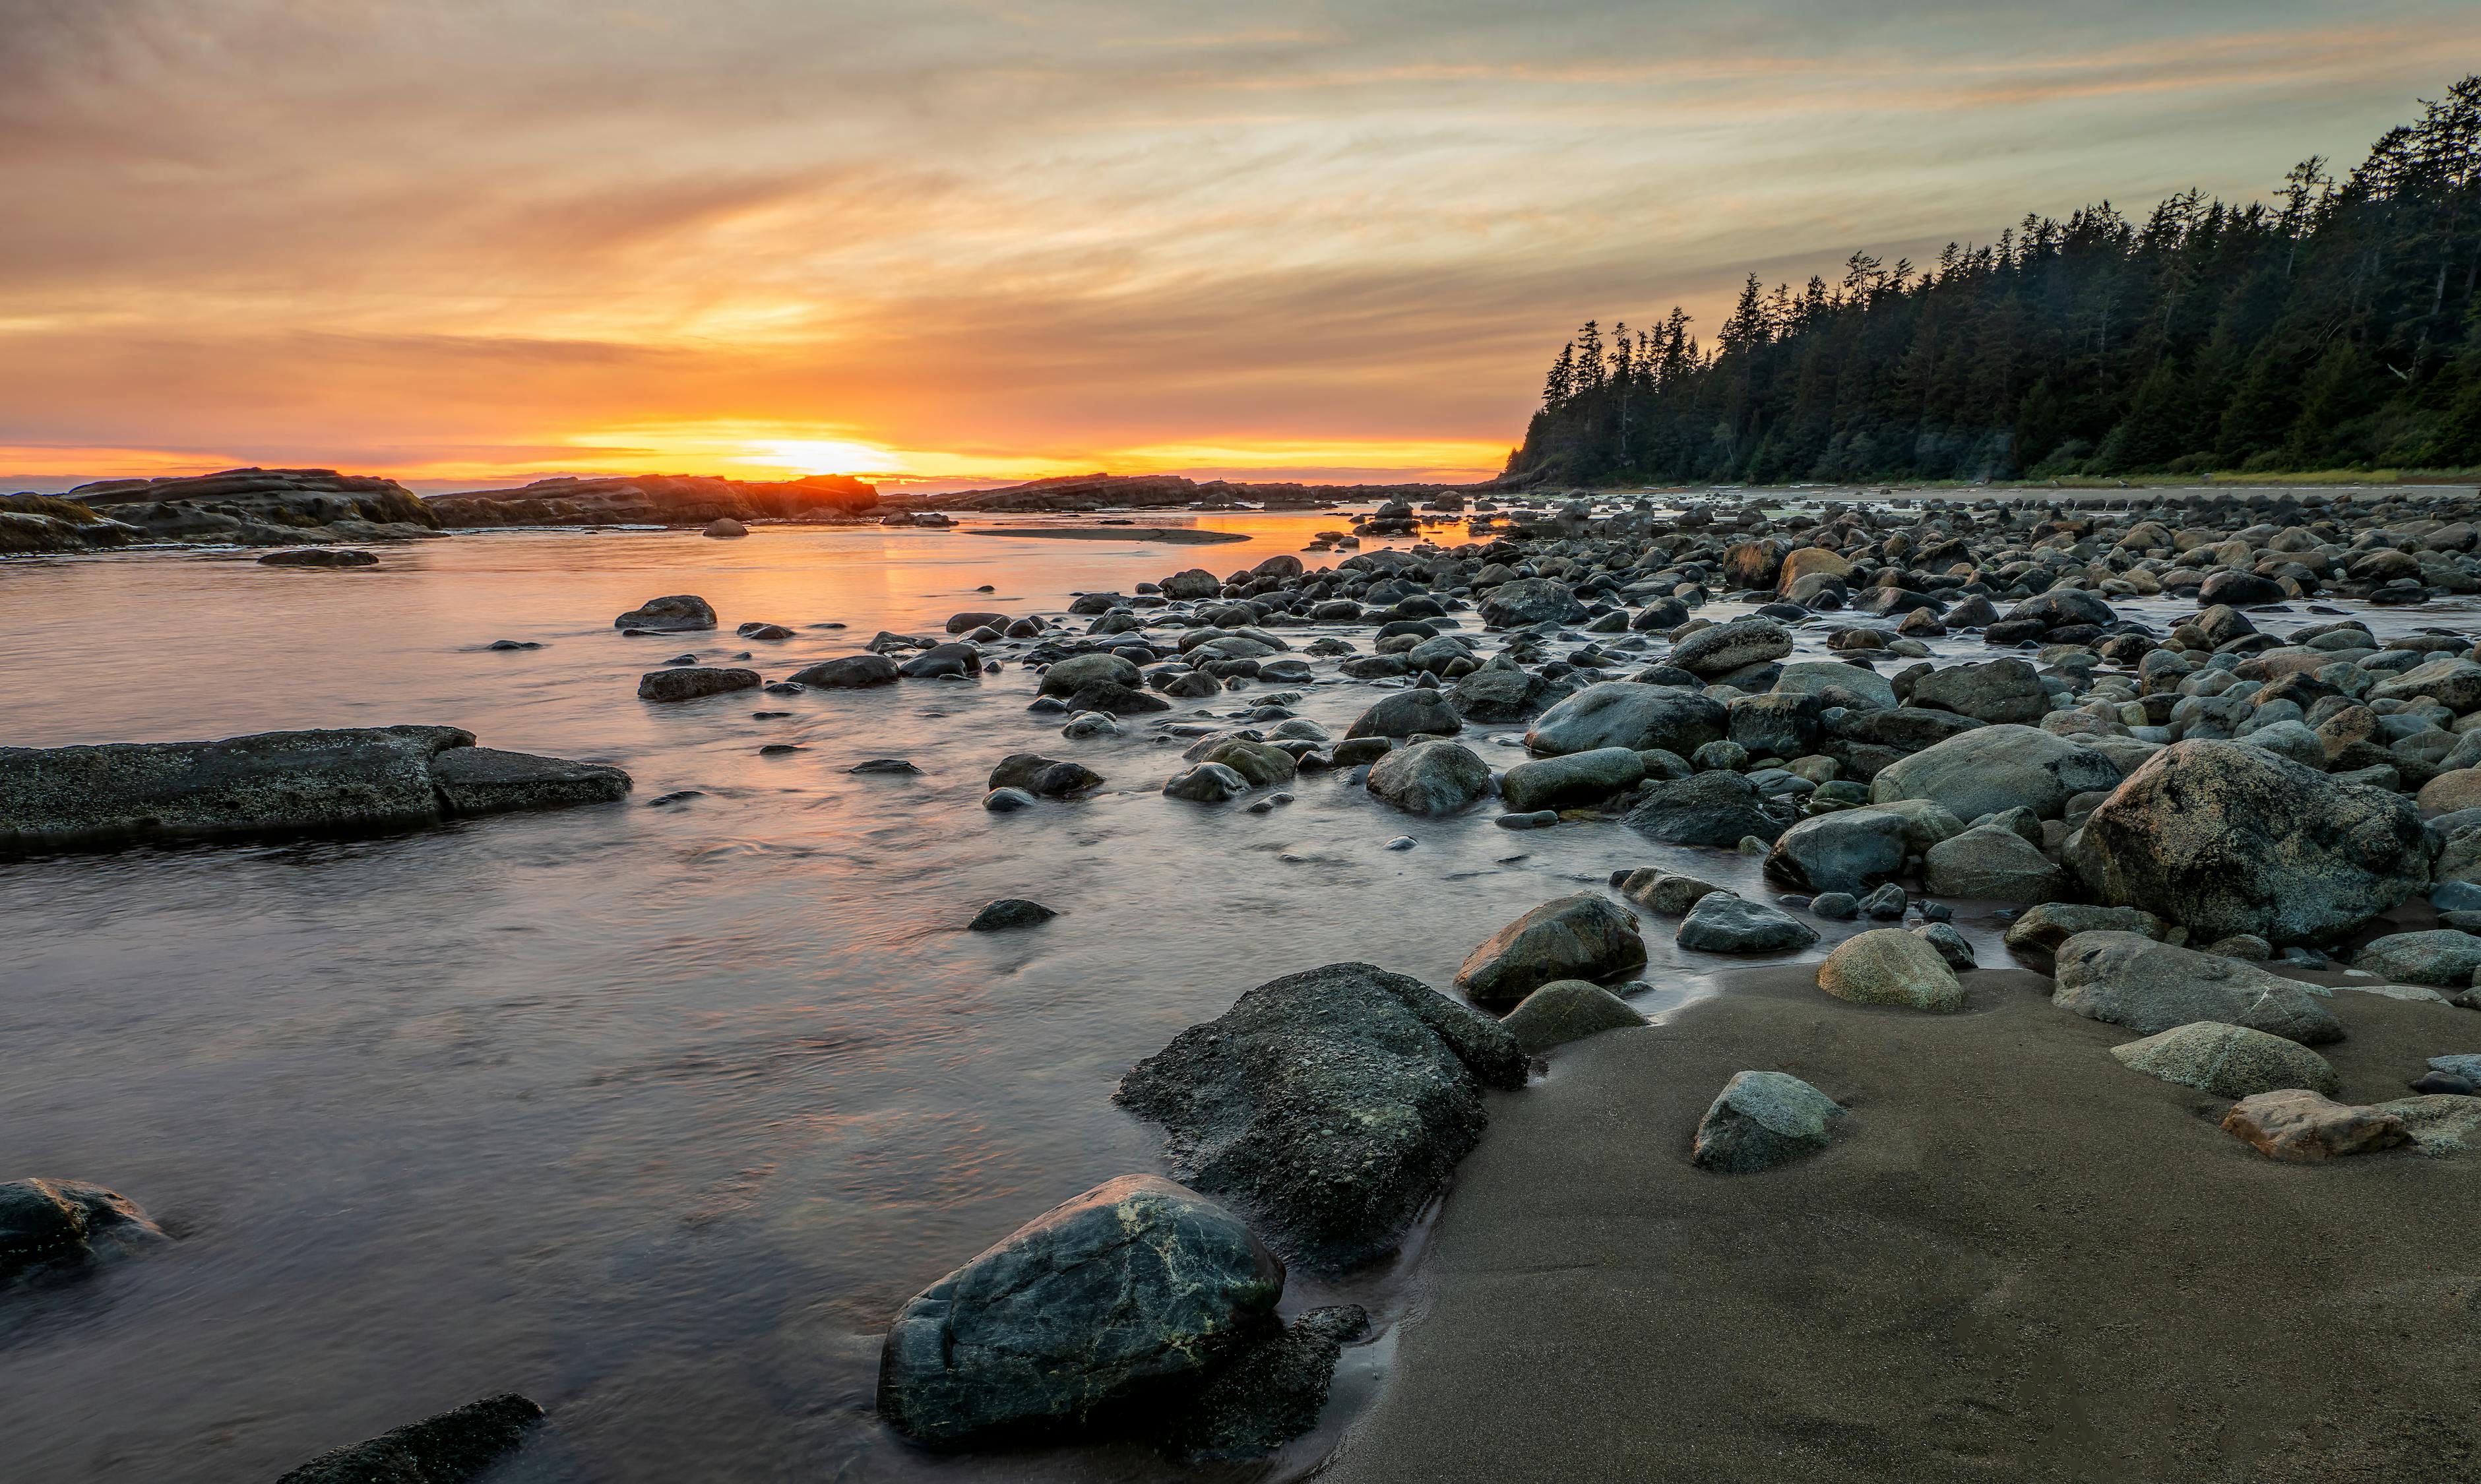 Rocky Shore With Rocks On The Shore During Sunset · Free Stock Photo